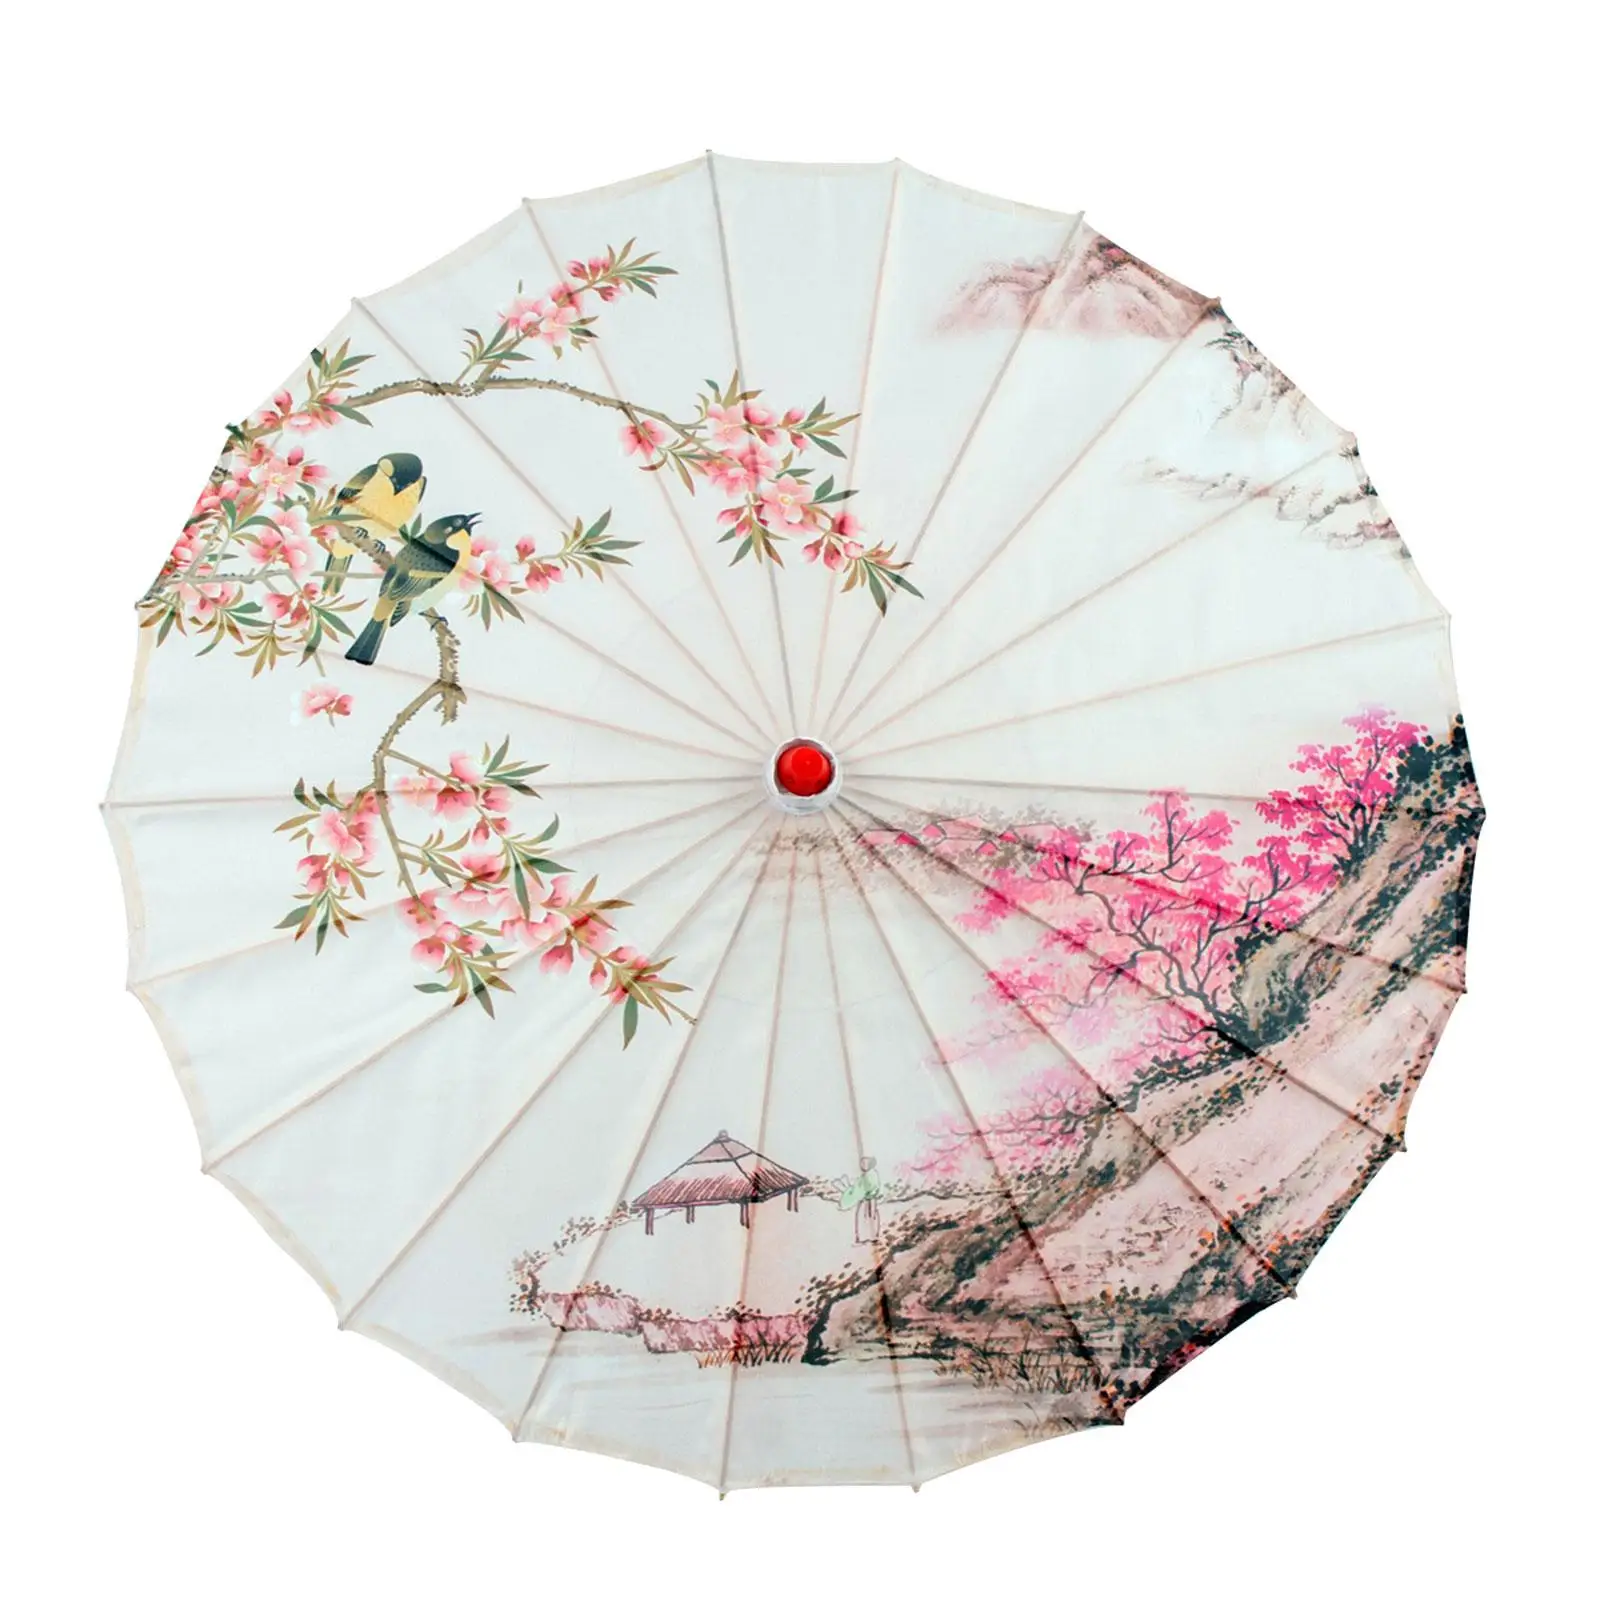 Chinese Oiled Paper Umbrella Rainproof Sunshade Ancient Dance Umbrella for Costumes Cosplay Photography Events Music Festivals